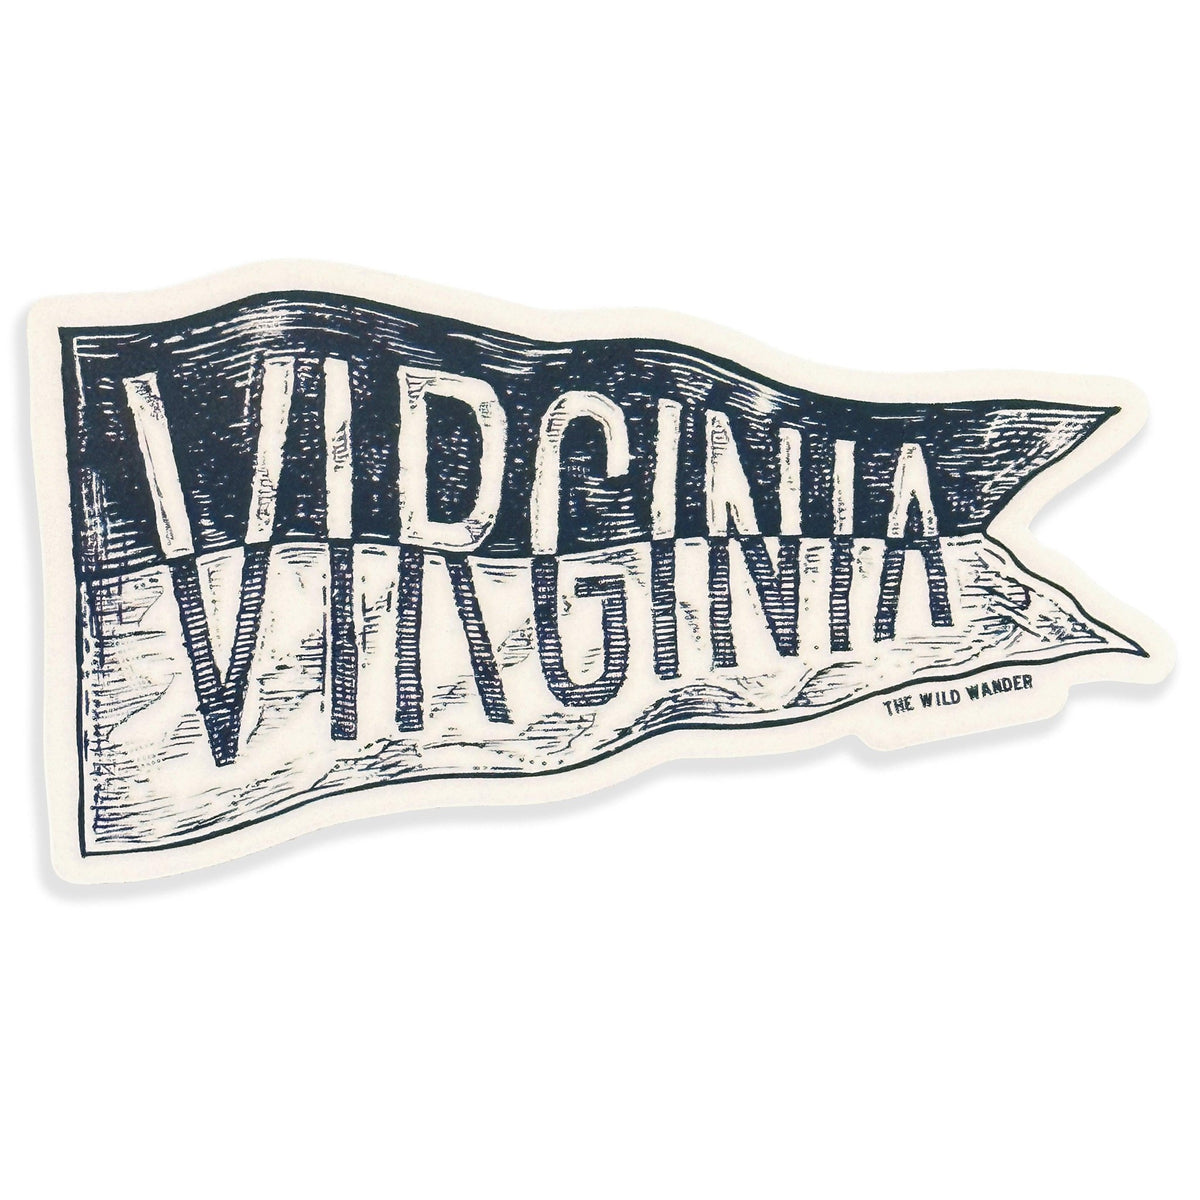 A Virginia Flag Sticker with the brand name The Wild Wander on it.